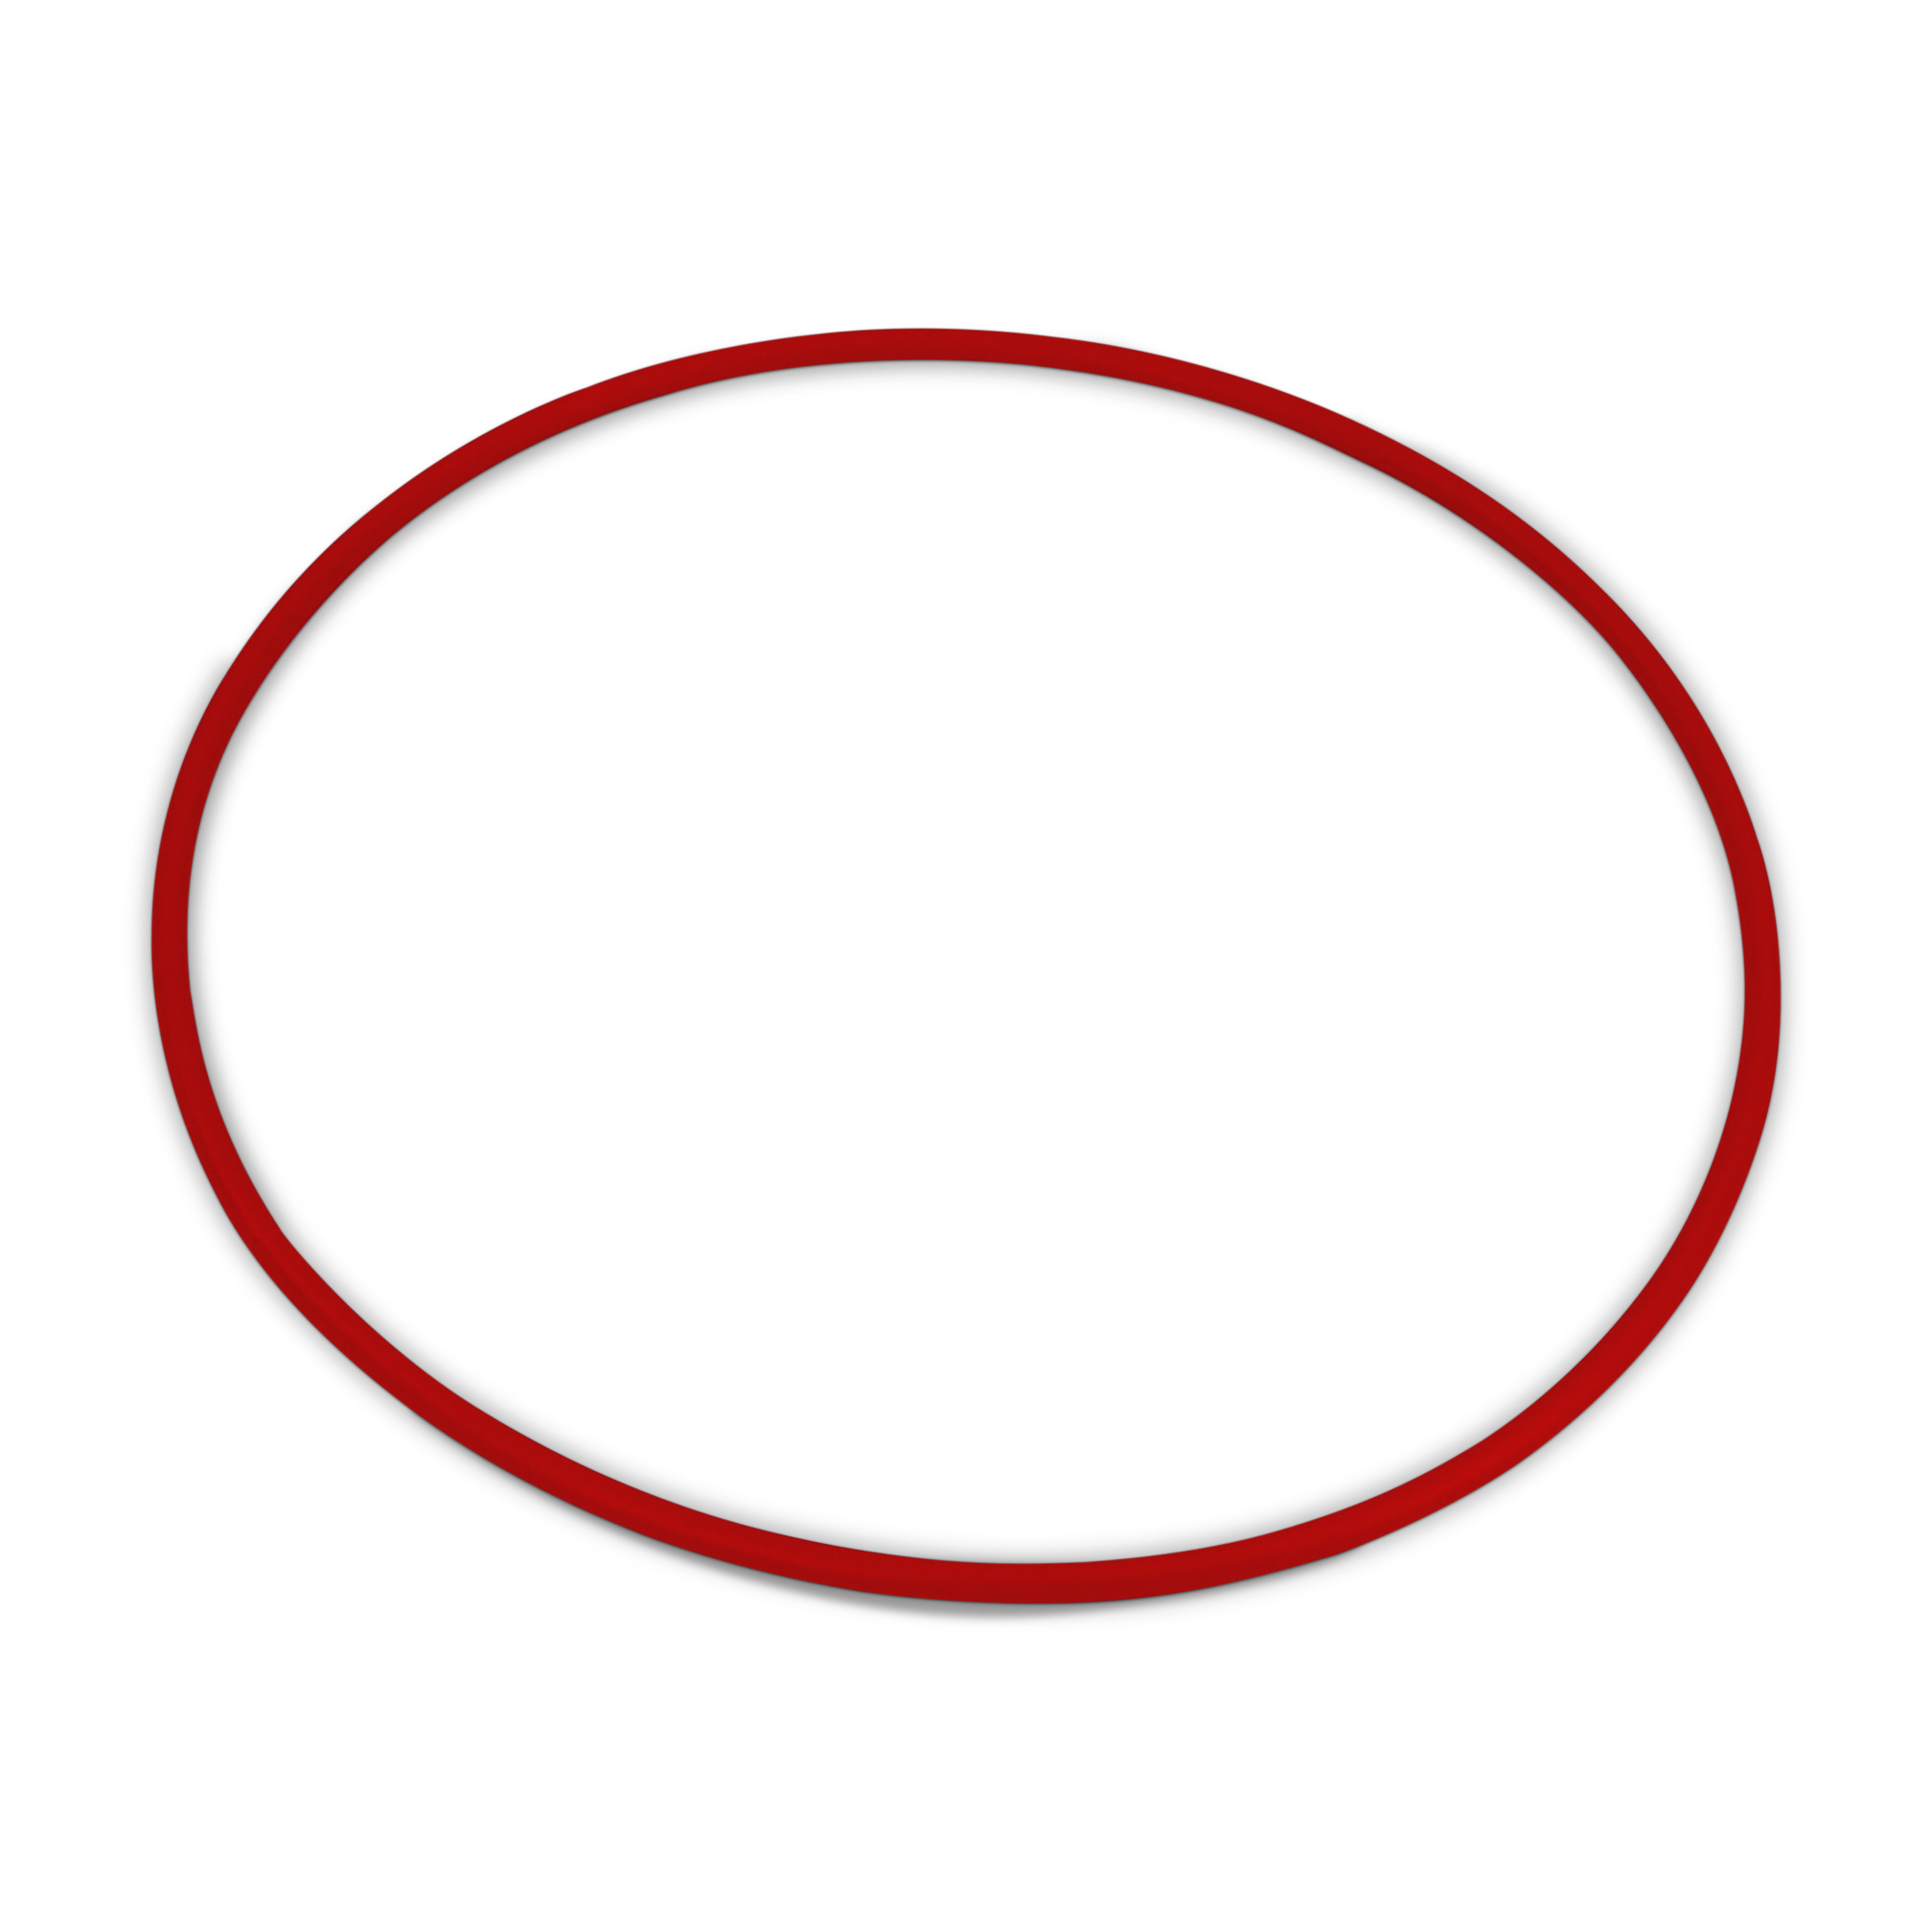 RG Hoop competition, red